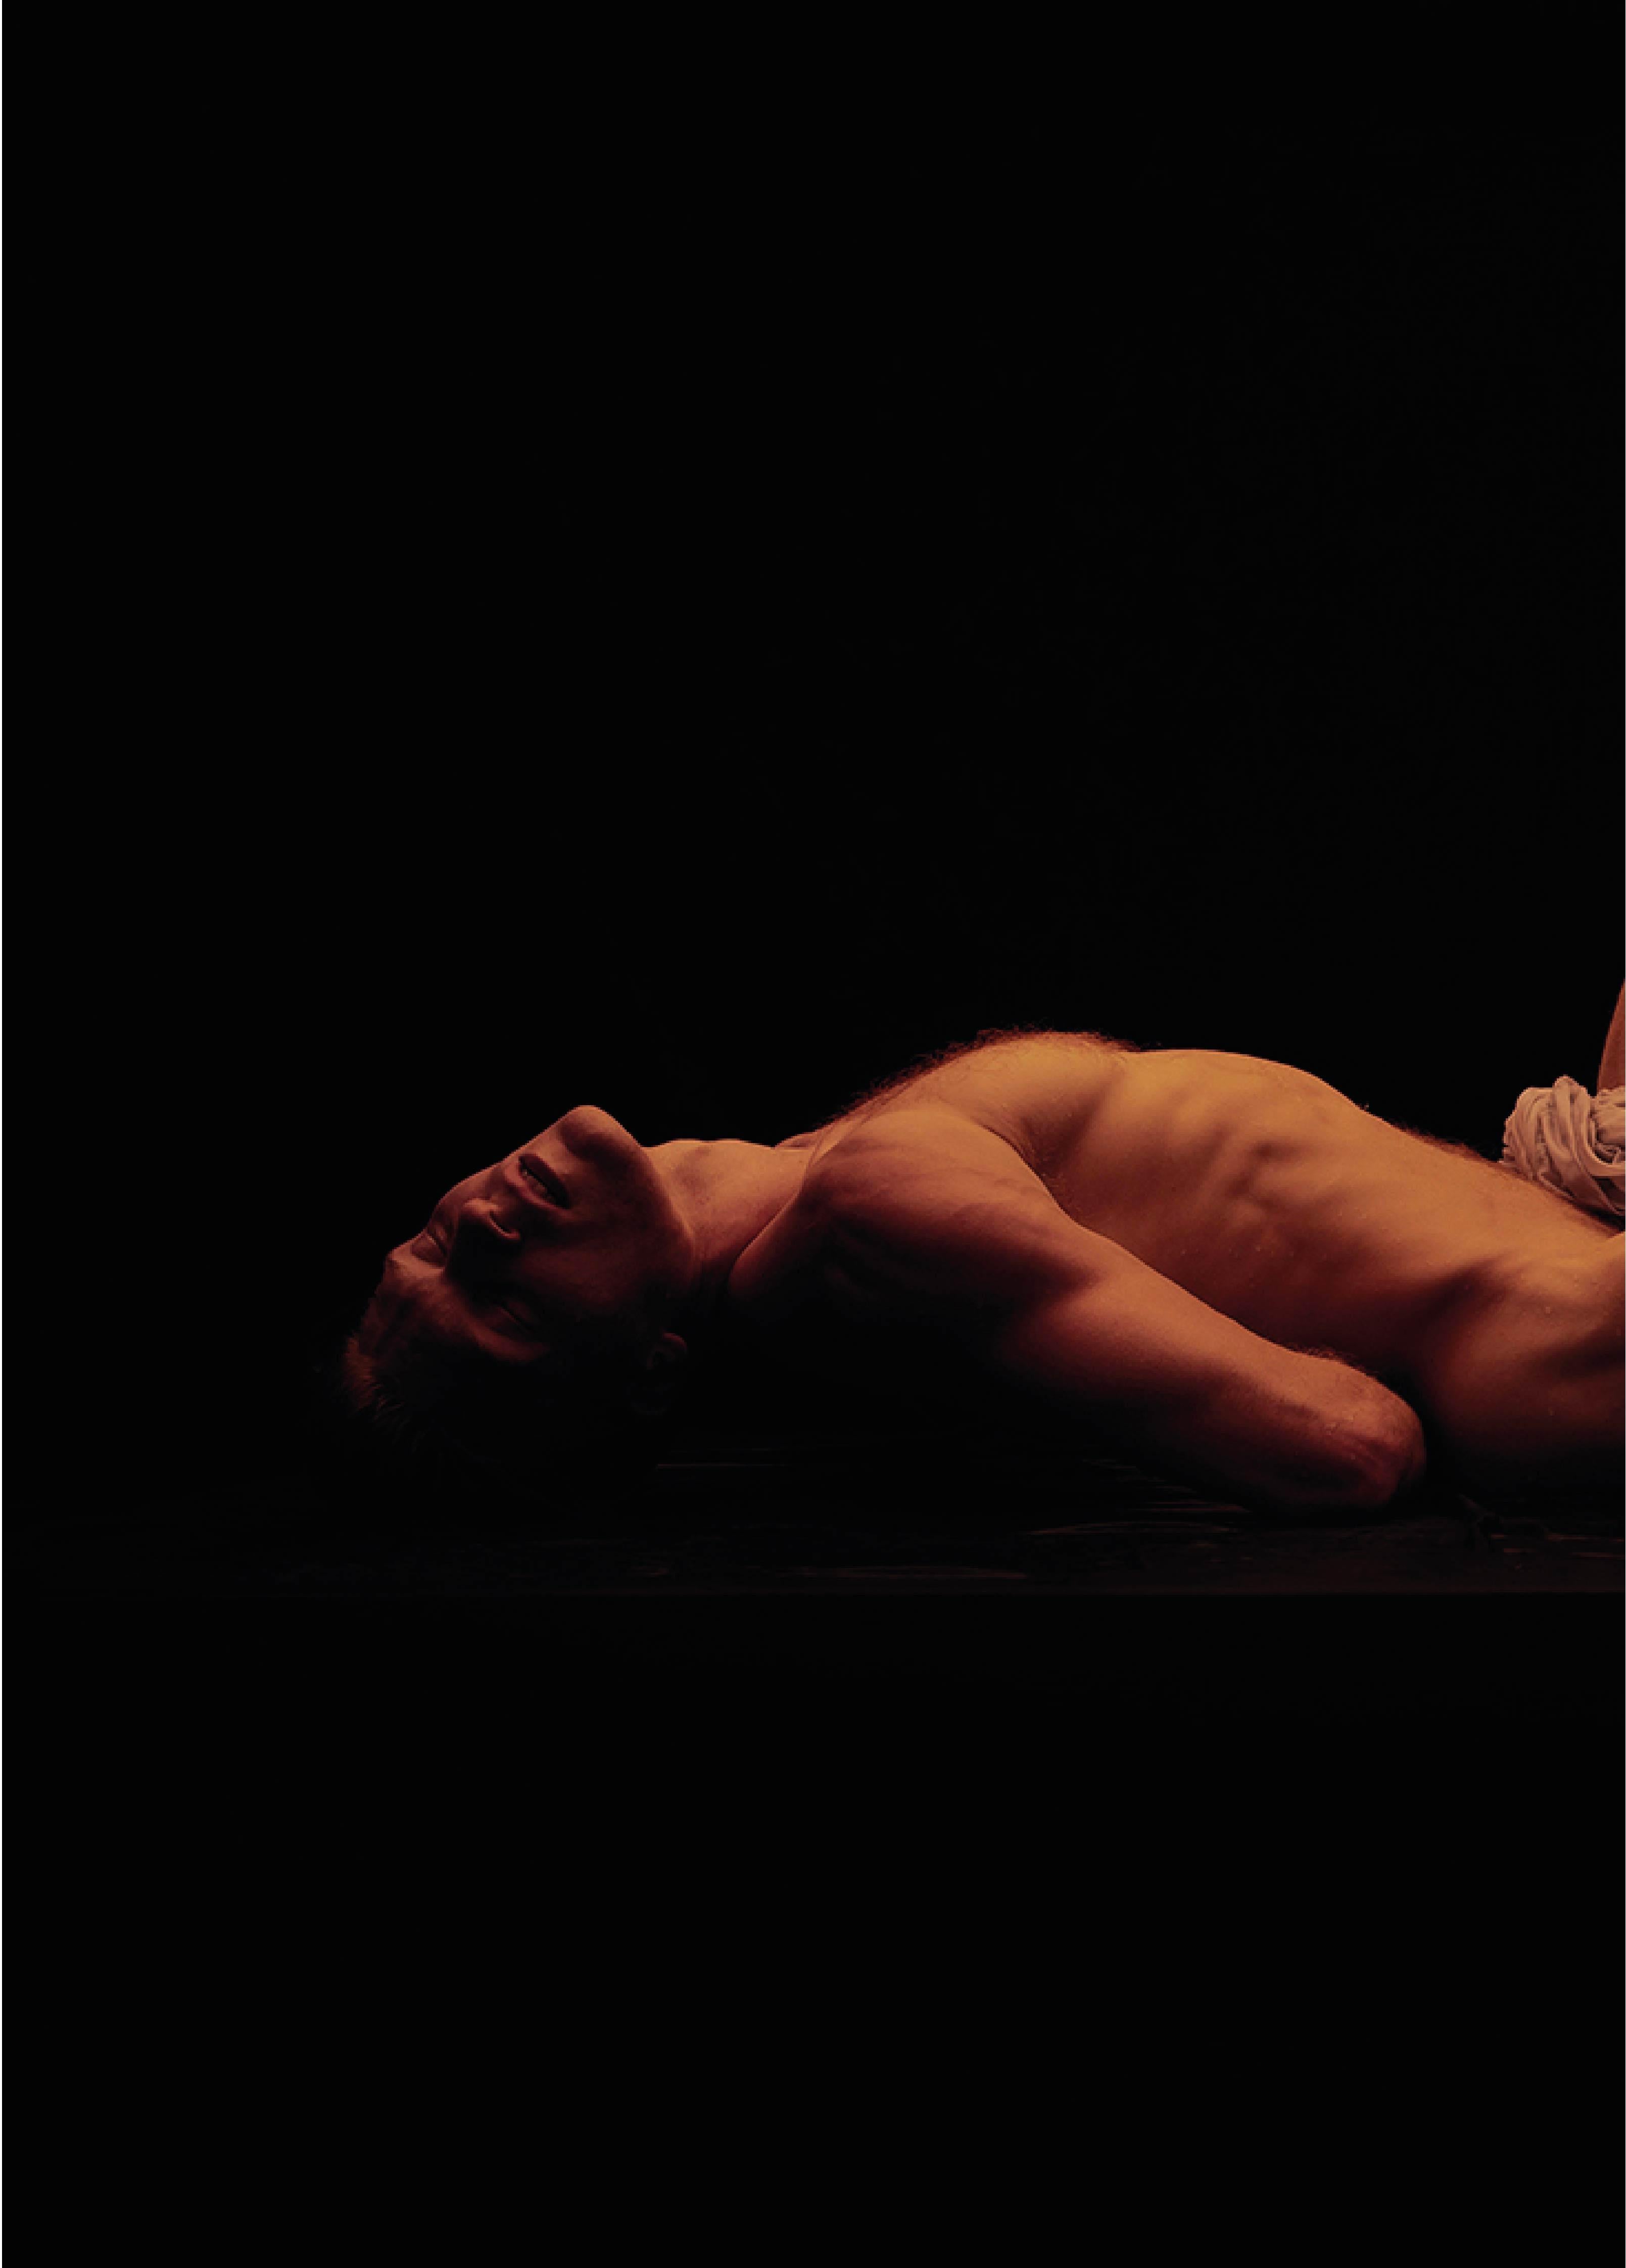 Luz. From the Momentum series. Male Nude. Color Limited Edition Photograph - Black Color Photograph by Ricky Cohete